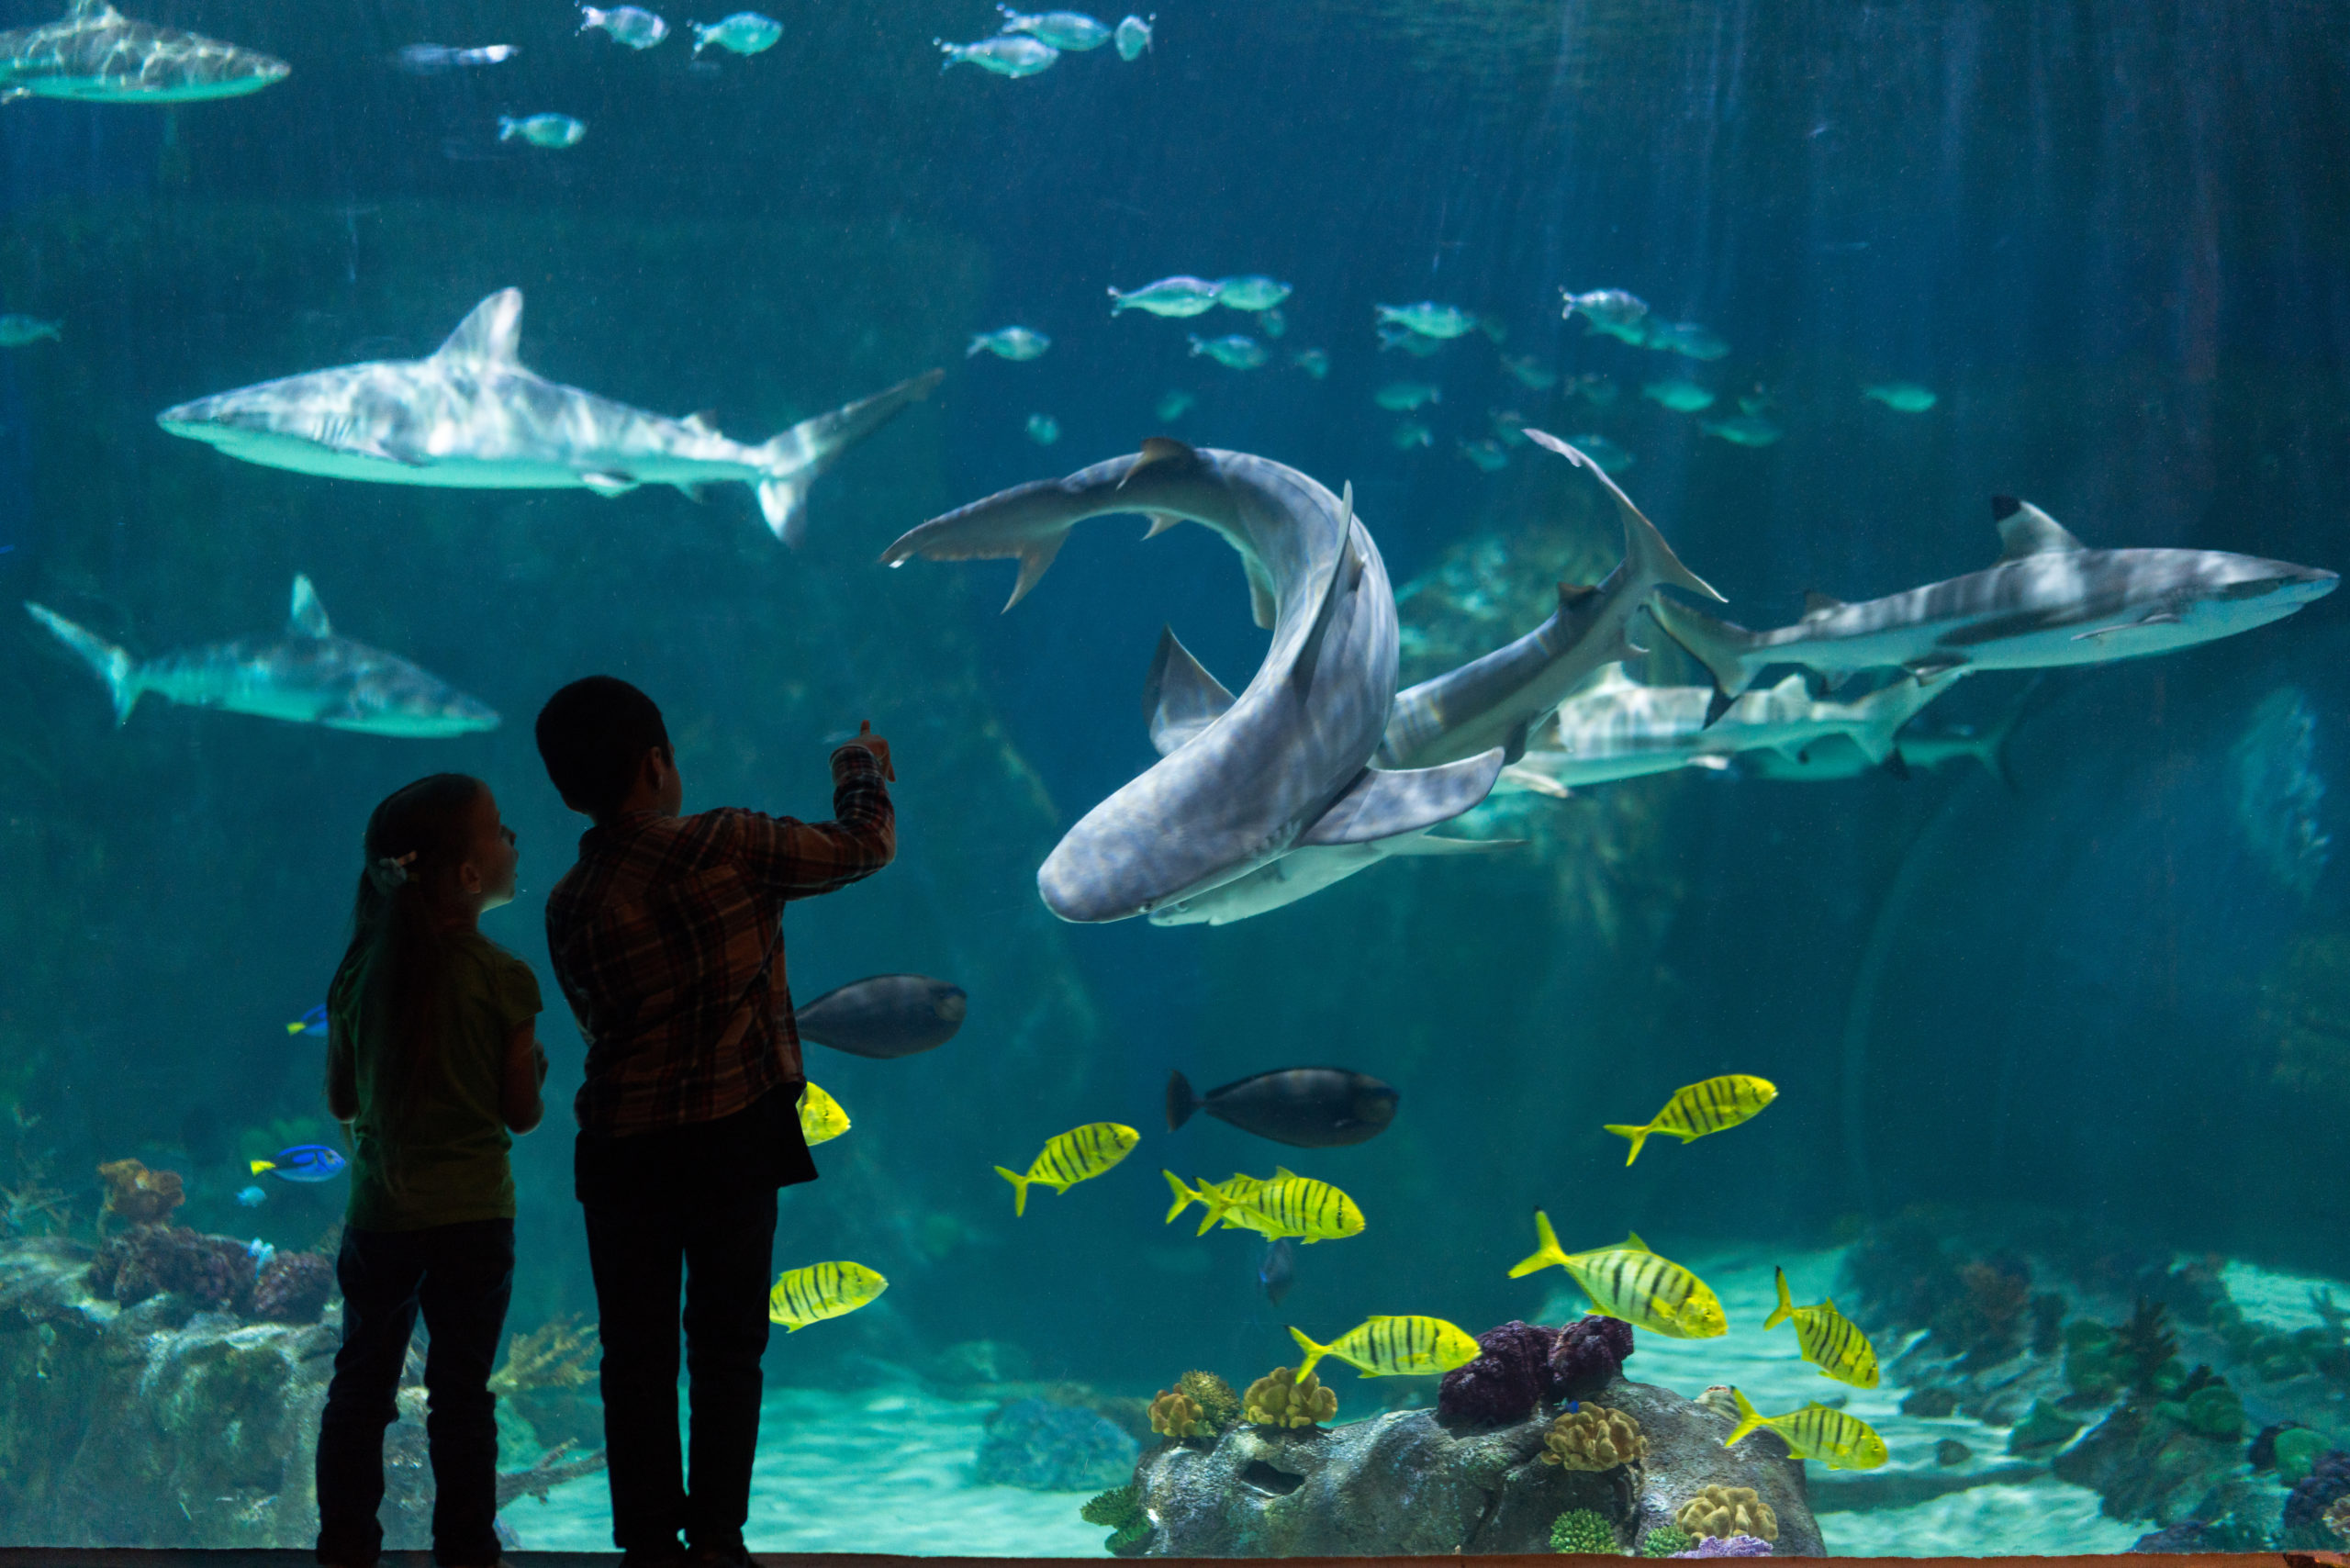 In the April Founder Series, Brent Anderson shares how he achieved a life-long dream of opening the Loveland Living Planet Aquarium.